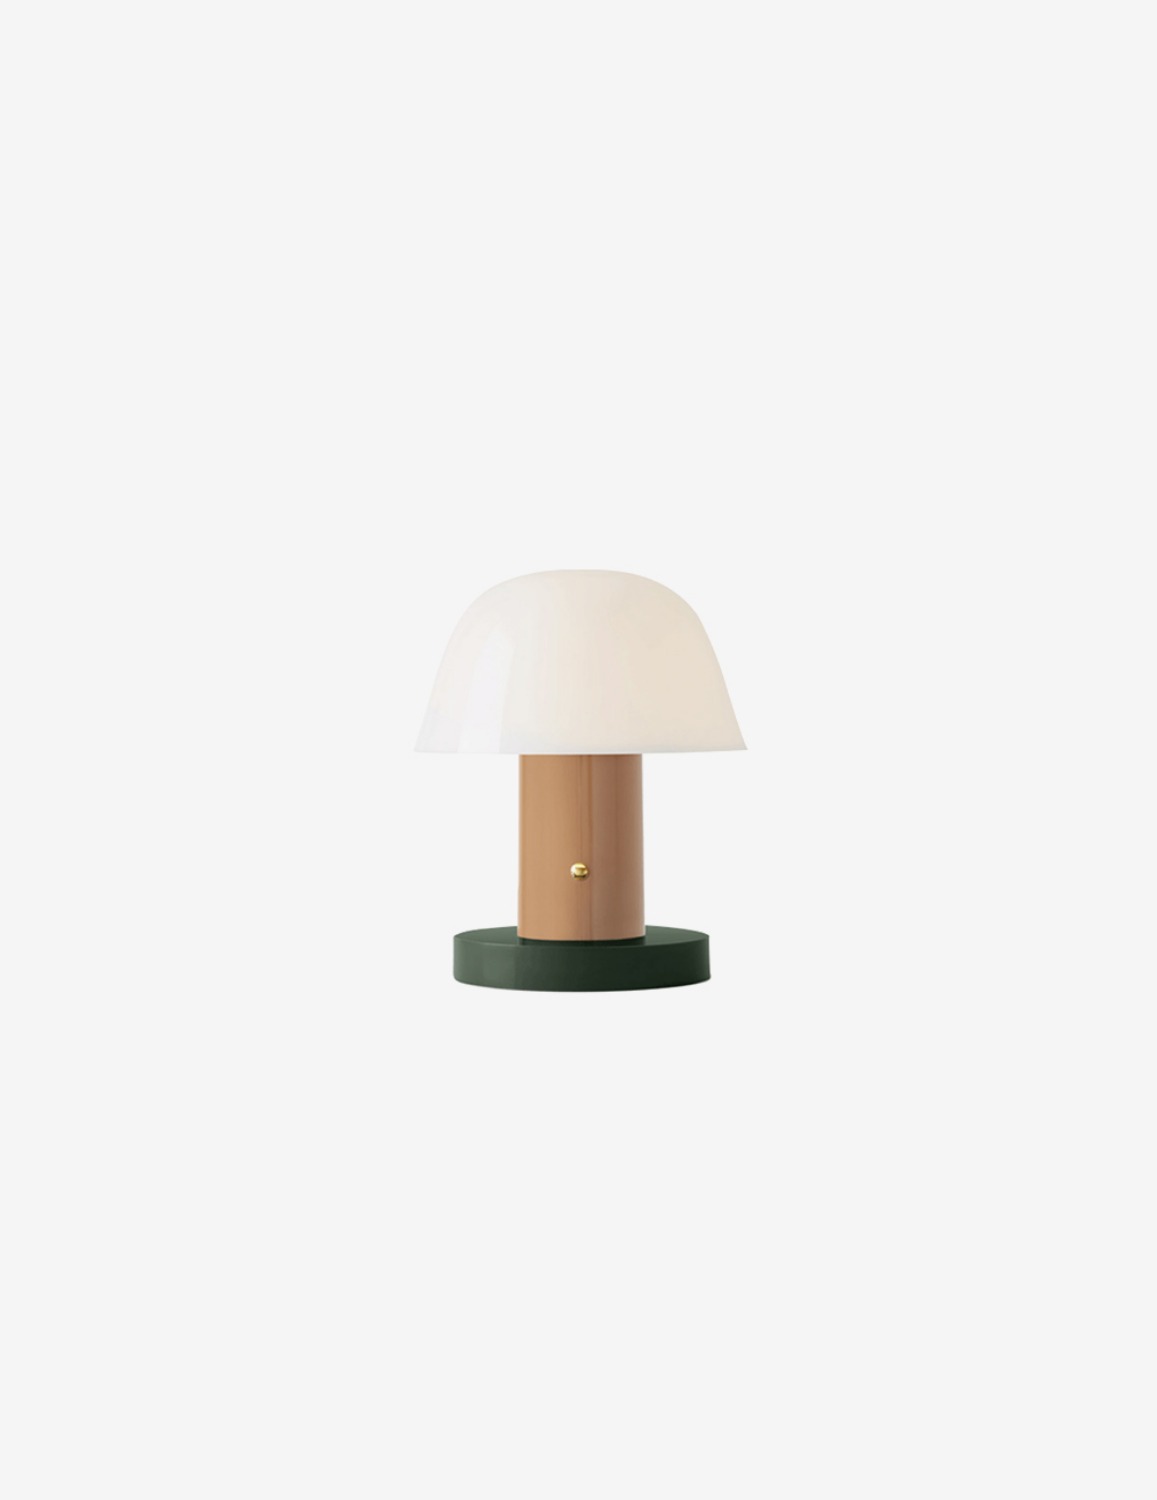 [Andtradition] Setago Lamp /JH27 (Nude/Forest)